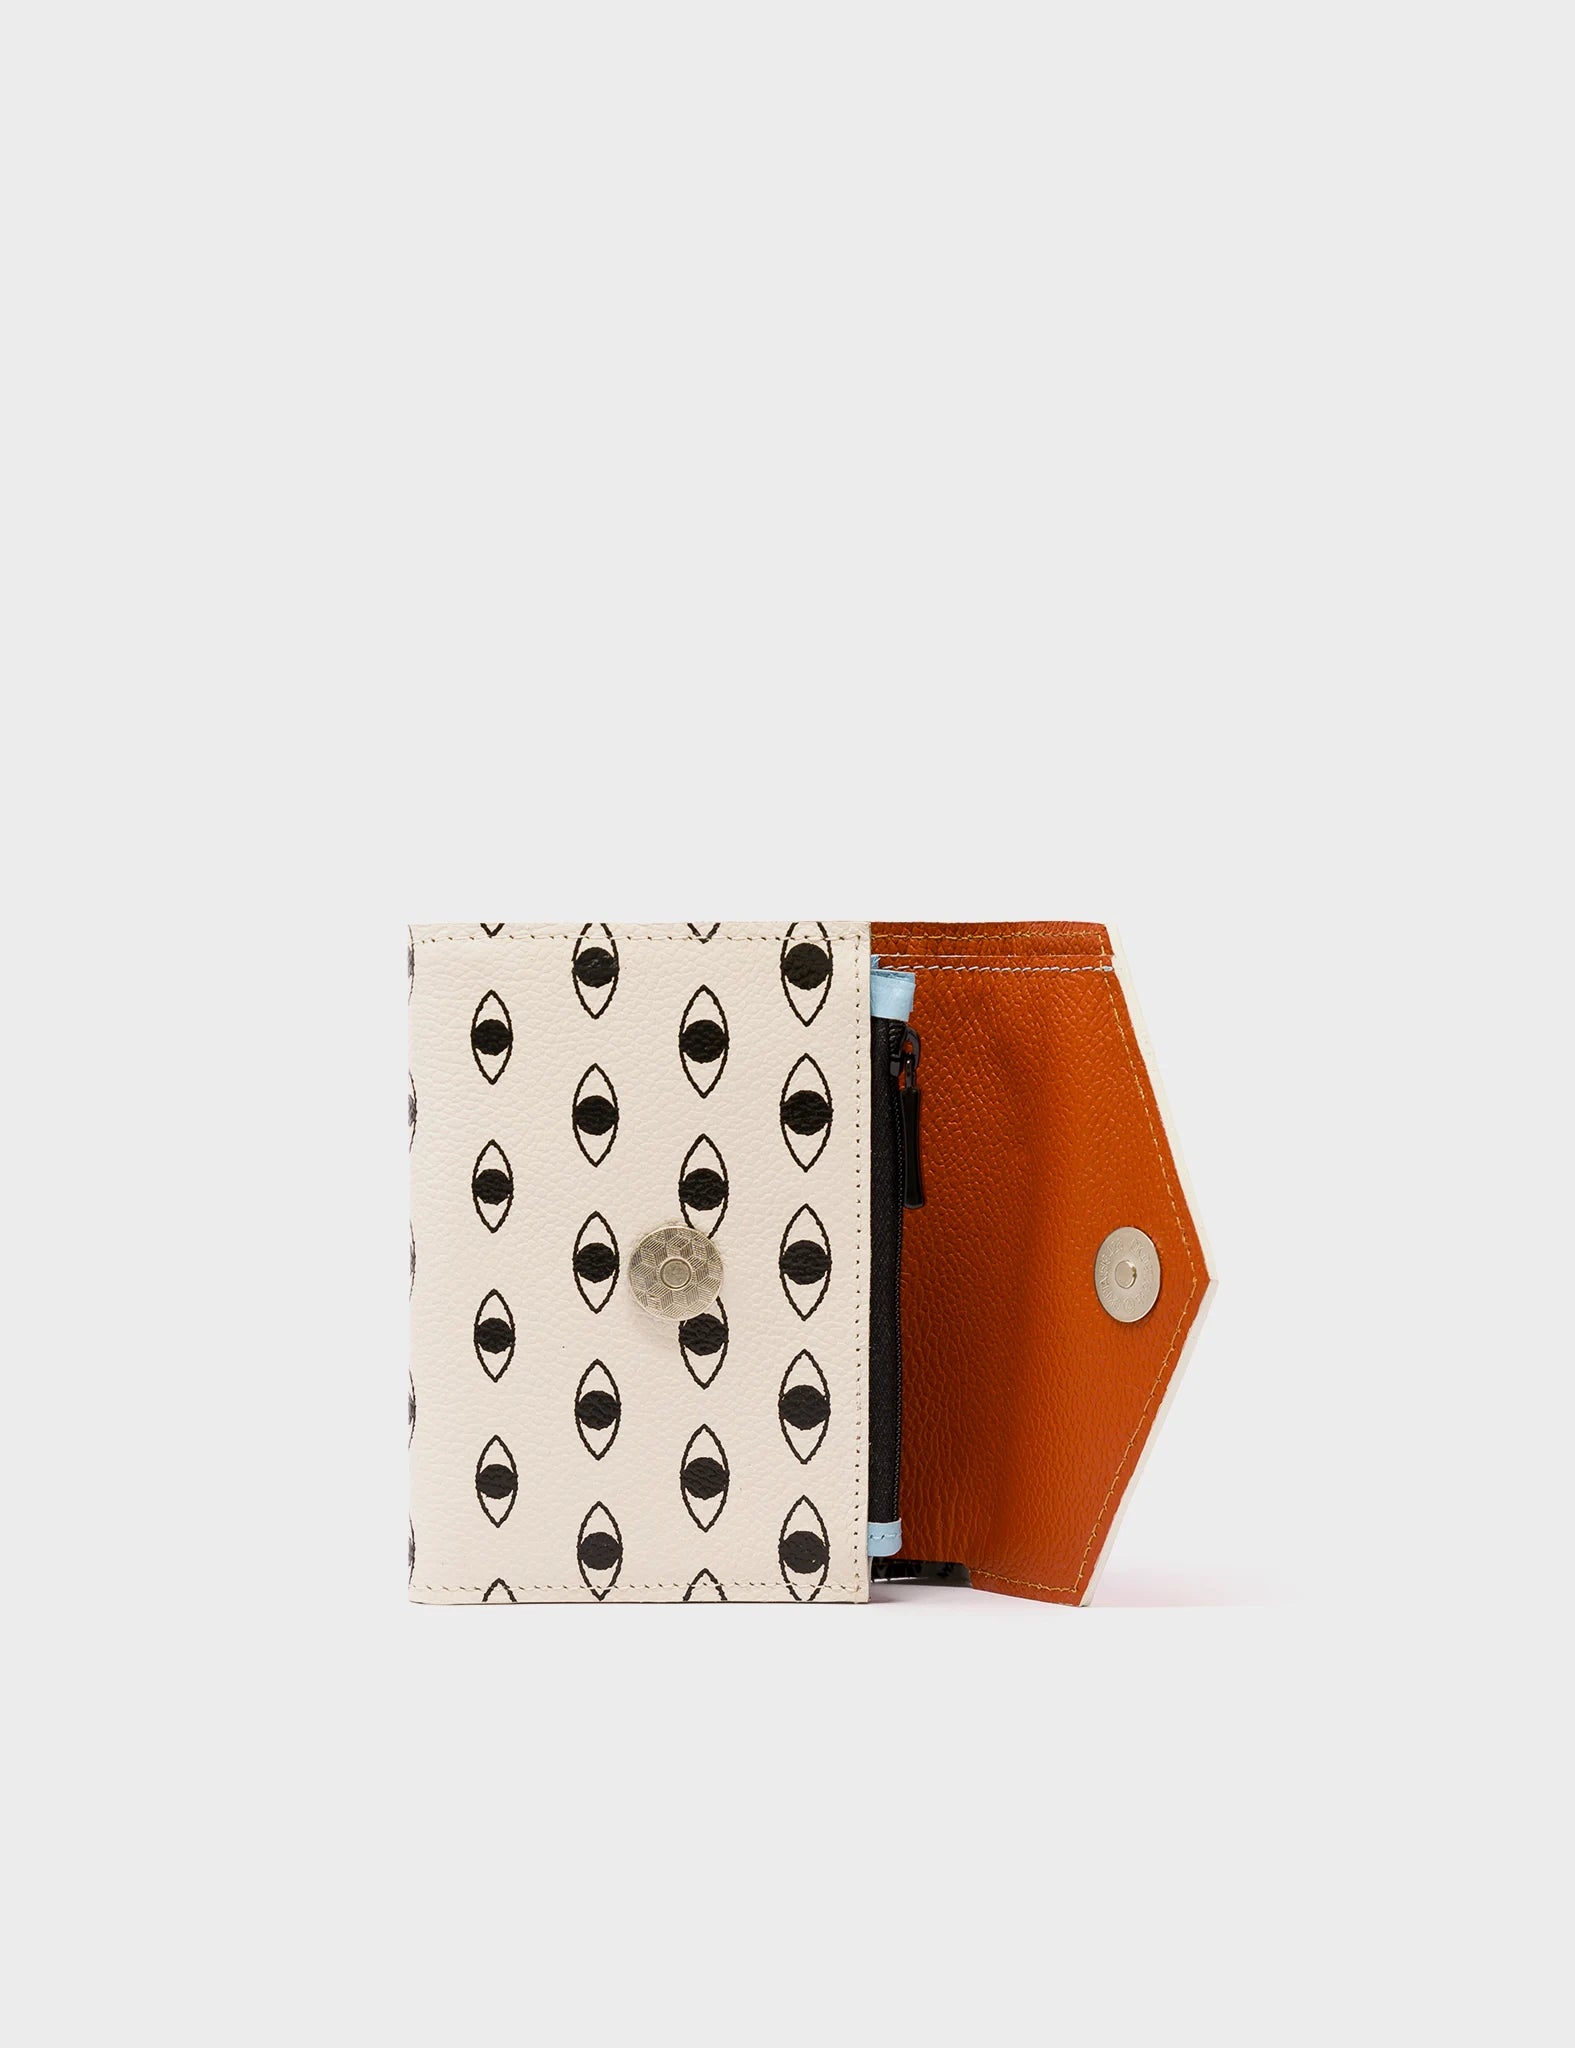 Fiona Cream And Cinnamon Leather Wallet - All Over Eyes Pattern - Flap